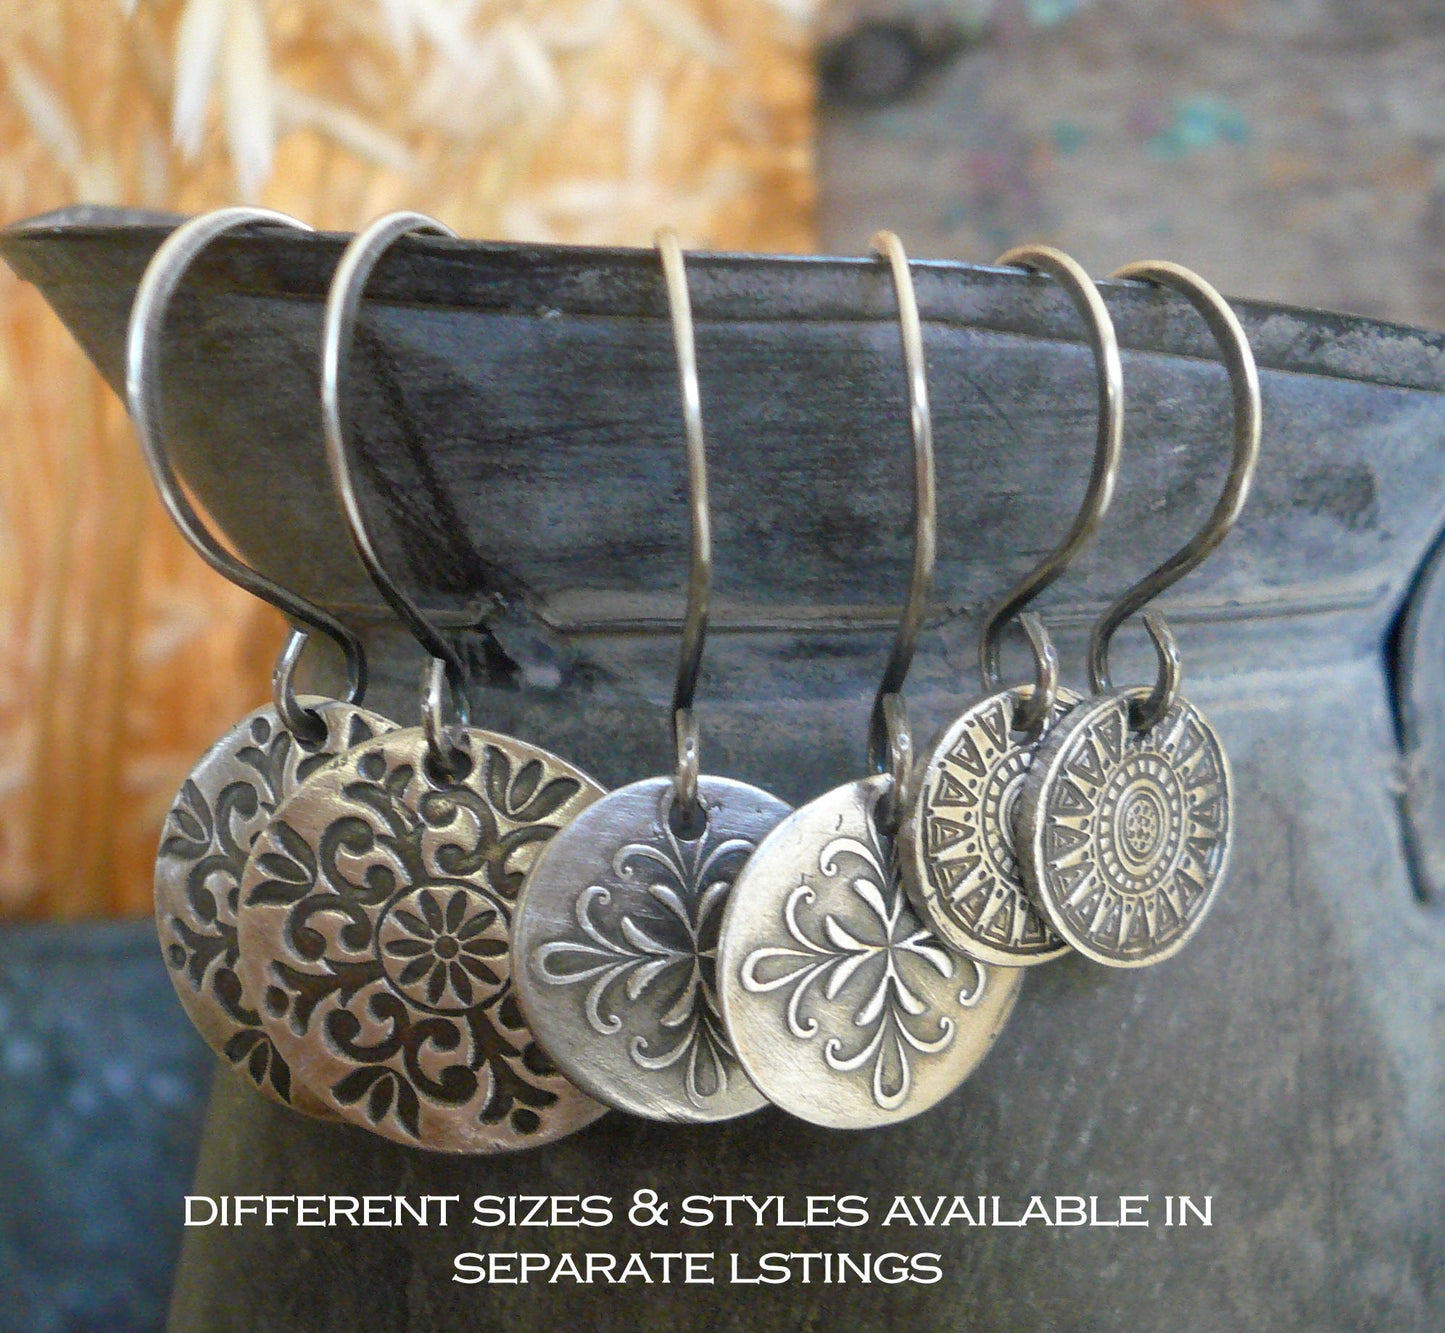 Medallion Earrings Large Style I - Handmade. Oxidized fine and sterling silver